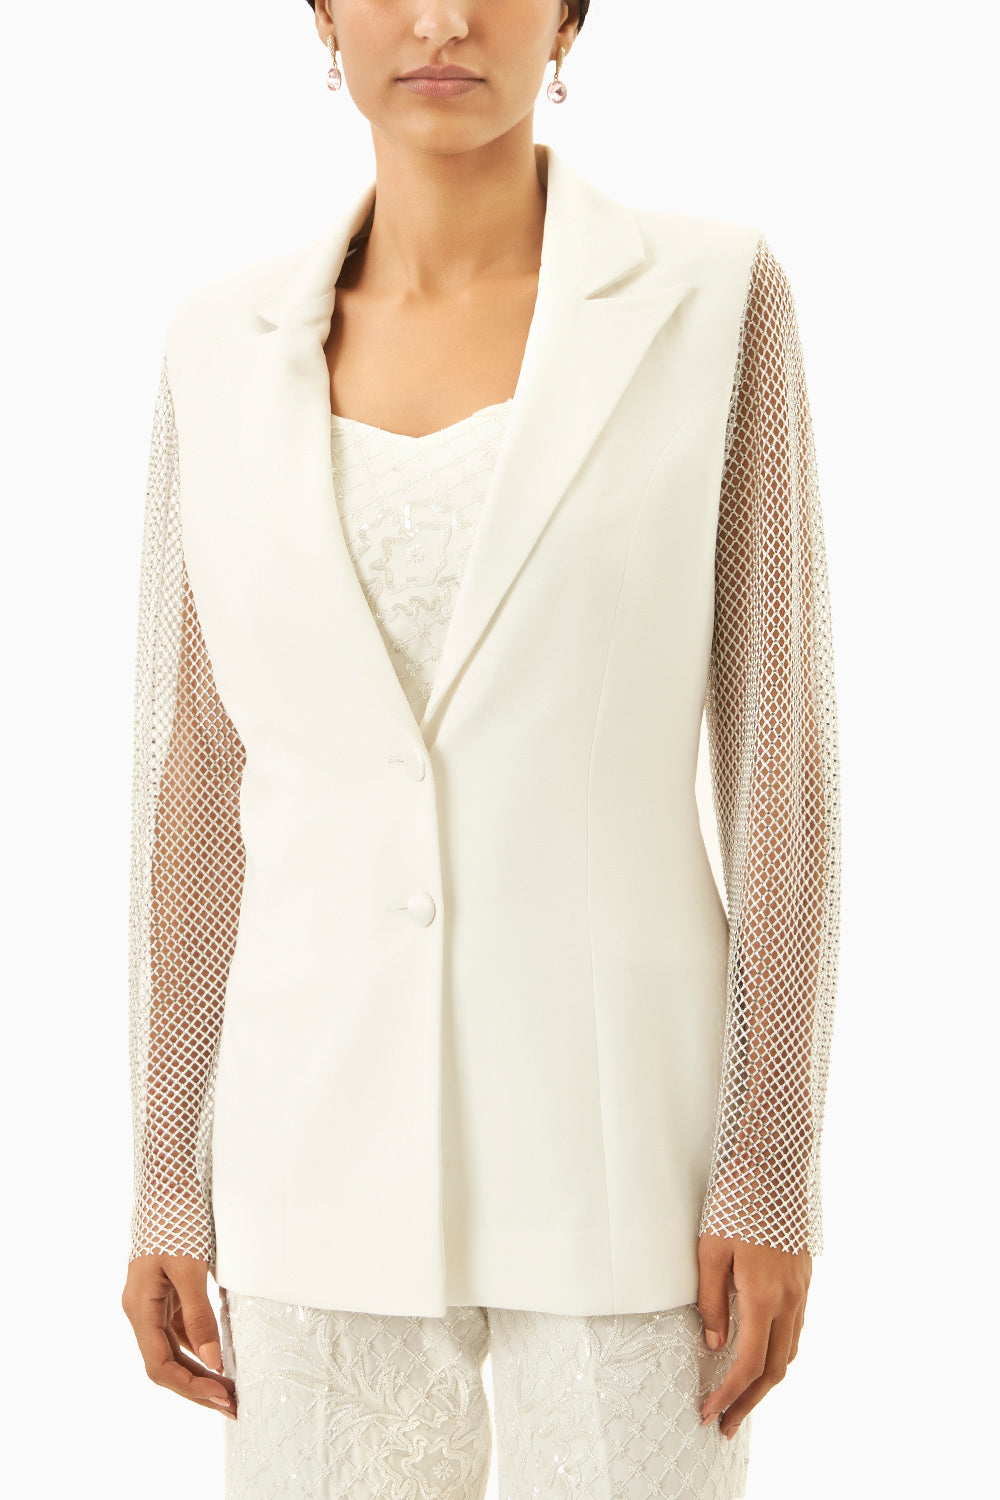 White Blazer With Crystal Mesh Lace